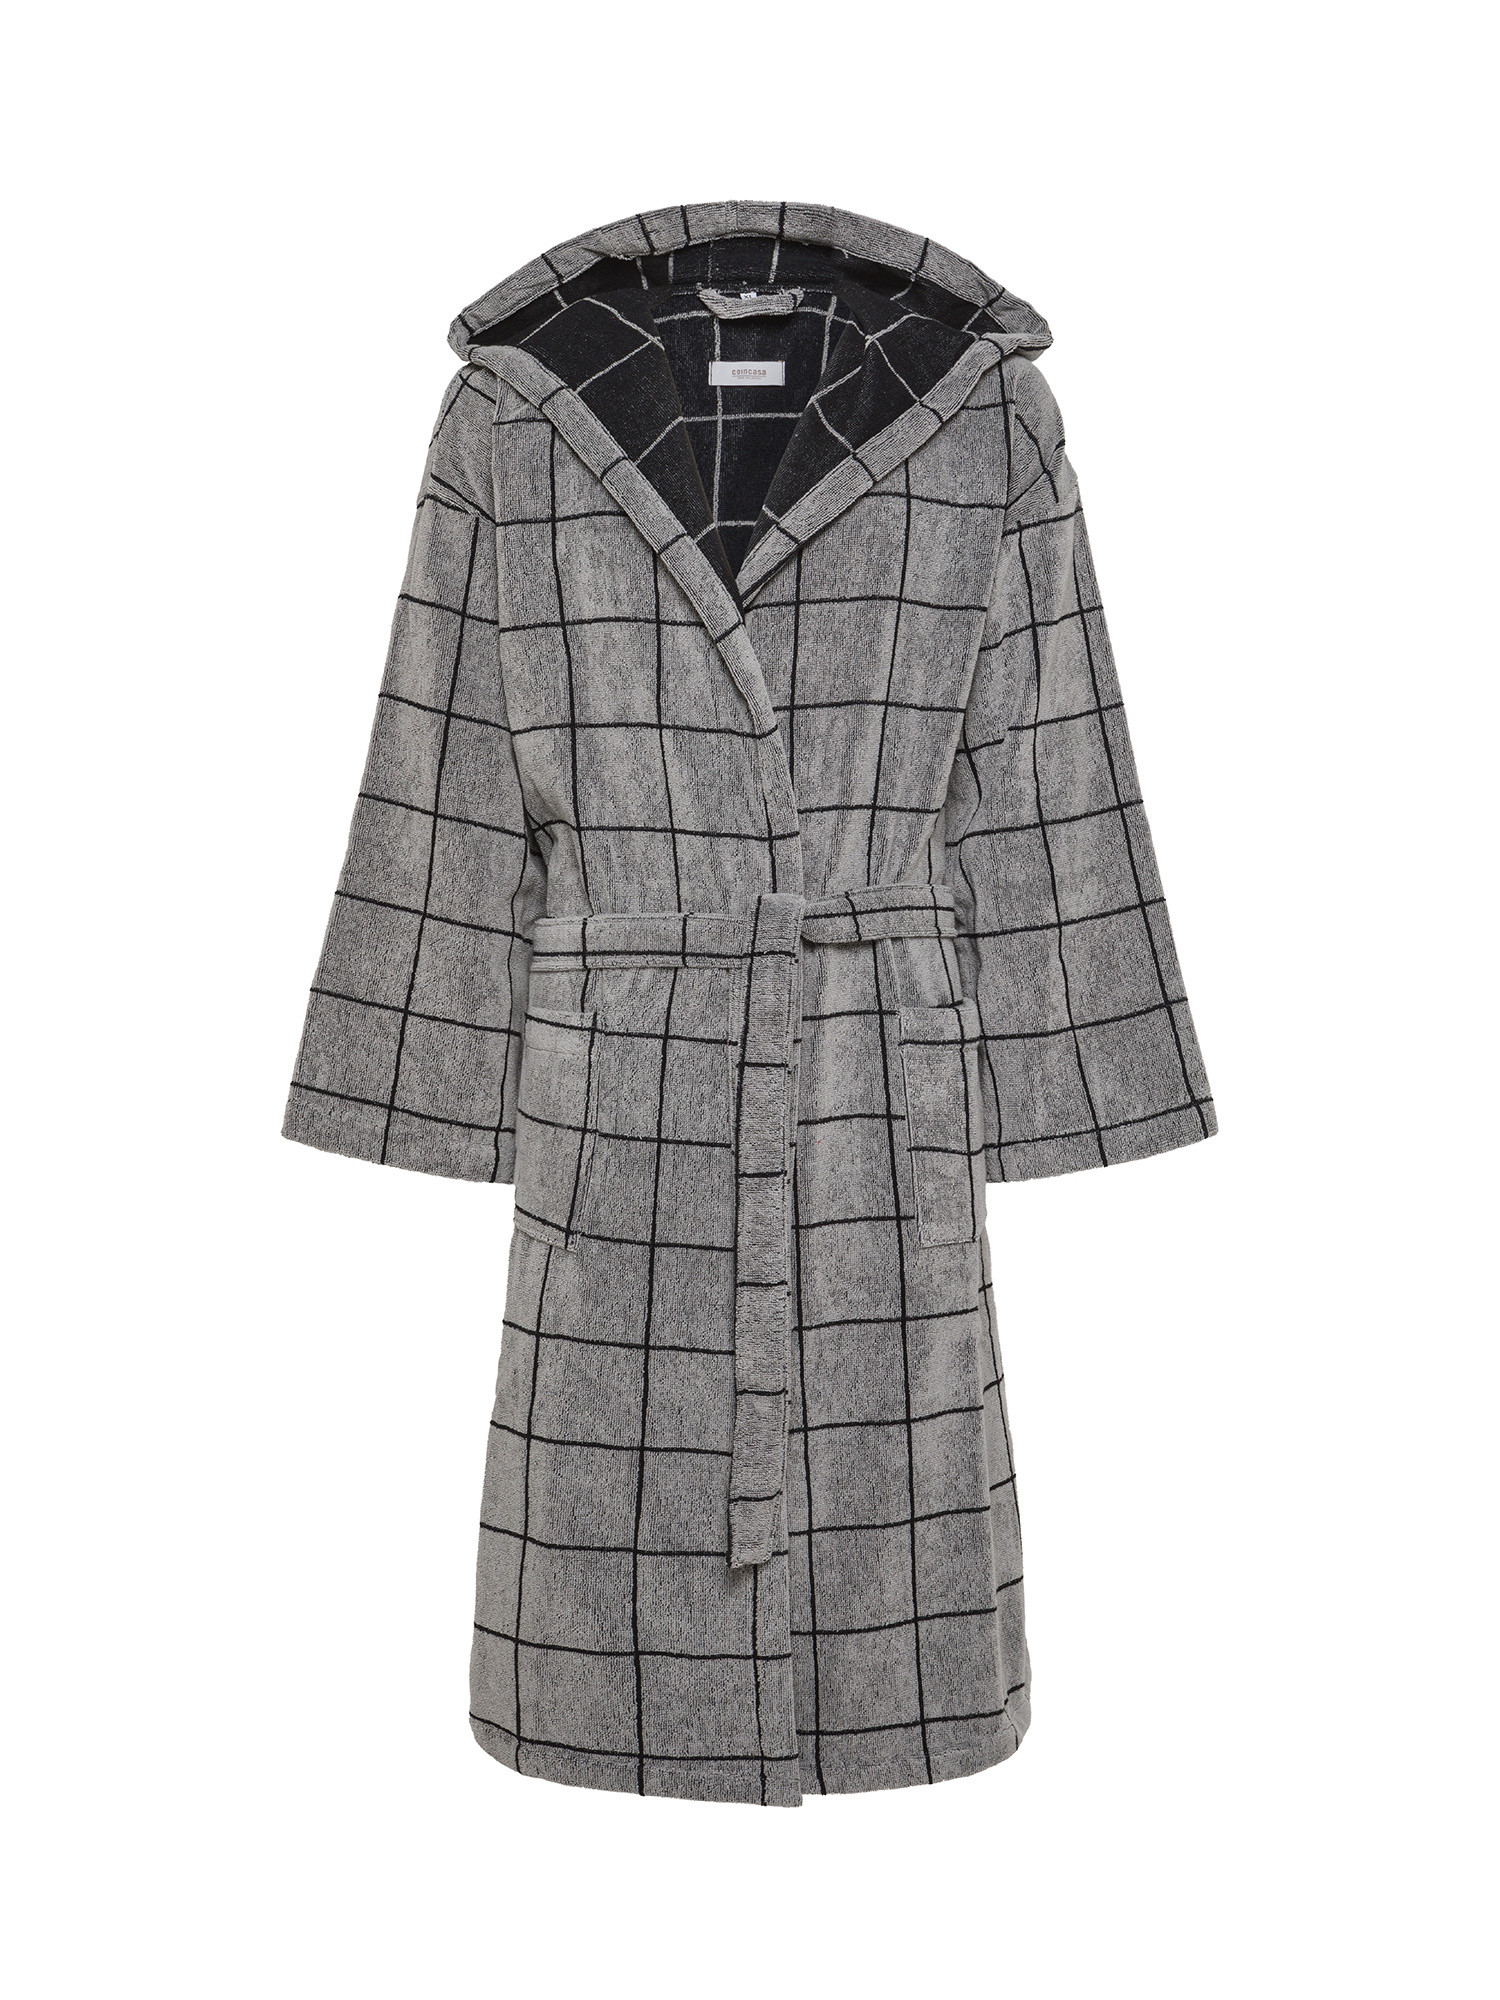 Bathrobe with hood in checked jacquard pure cotton terry, Black, large image number 0